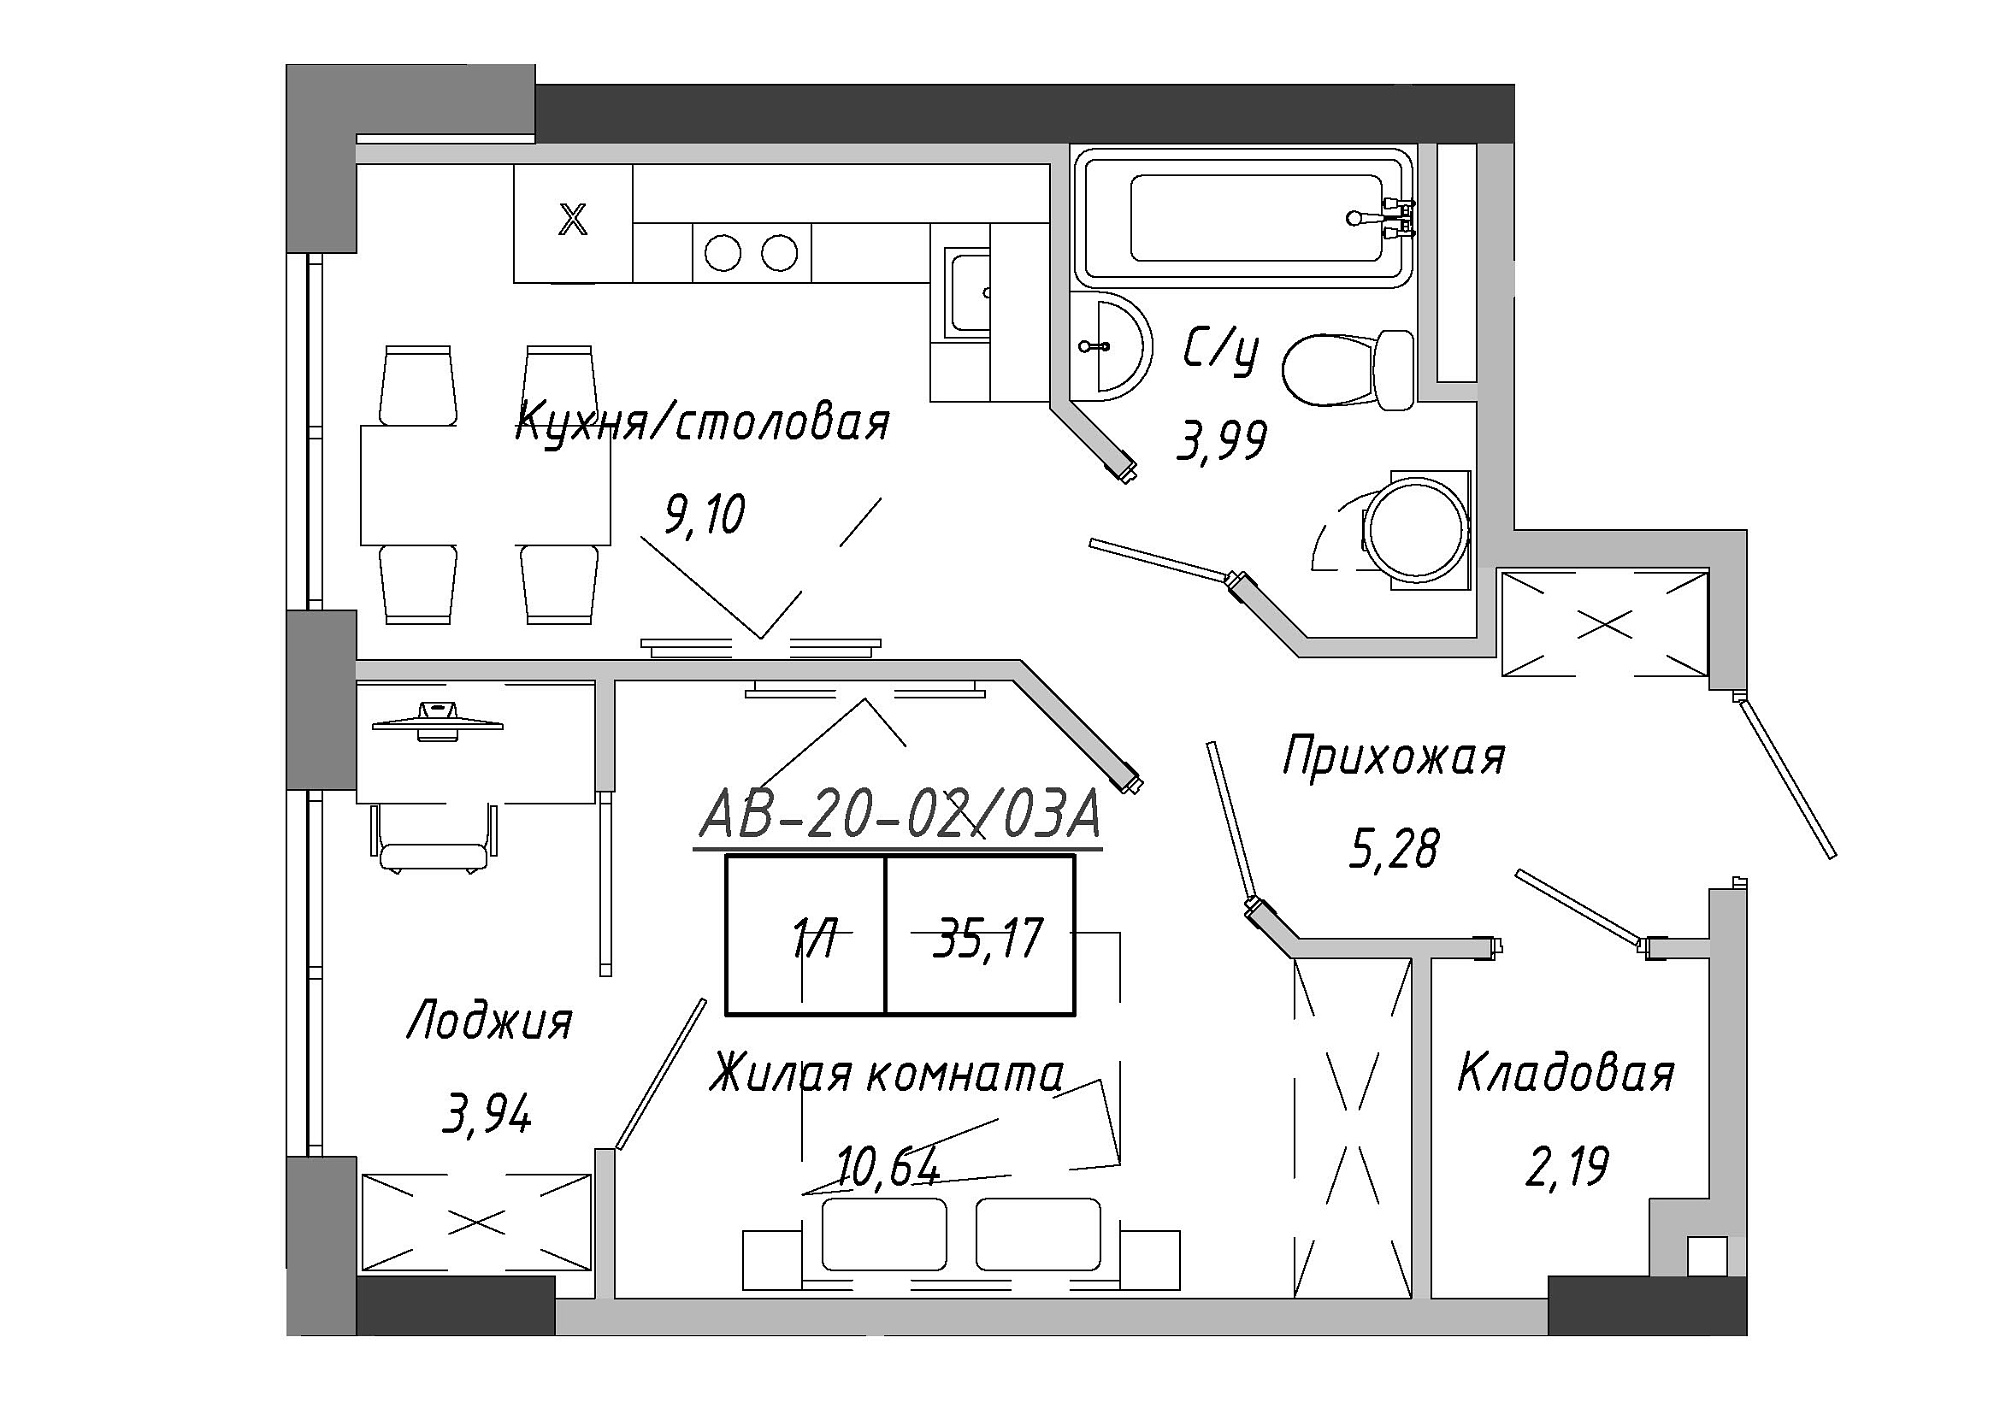 Planning 1-rm flats area 35.17m2, AB-20-02/0003а.